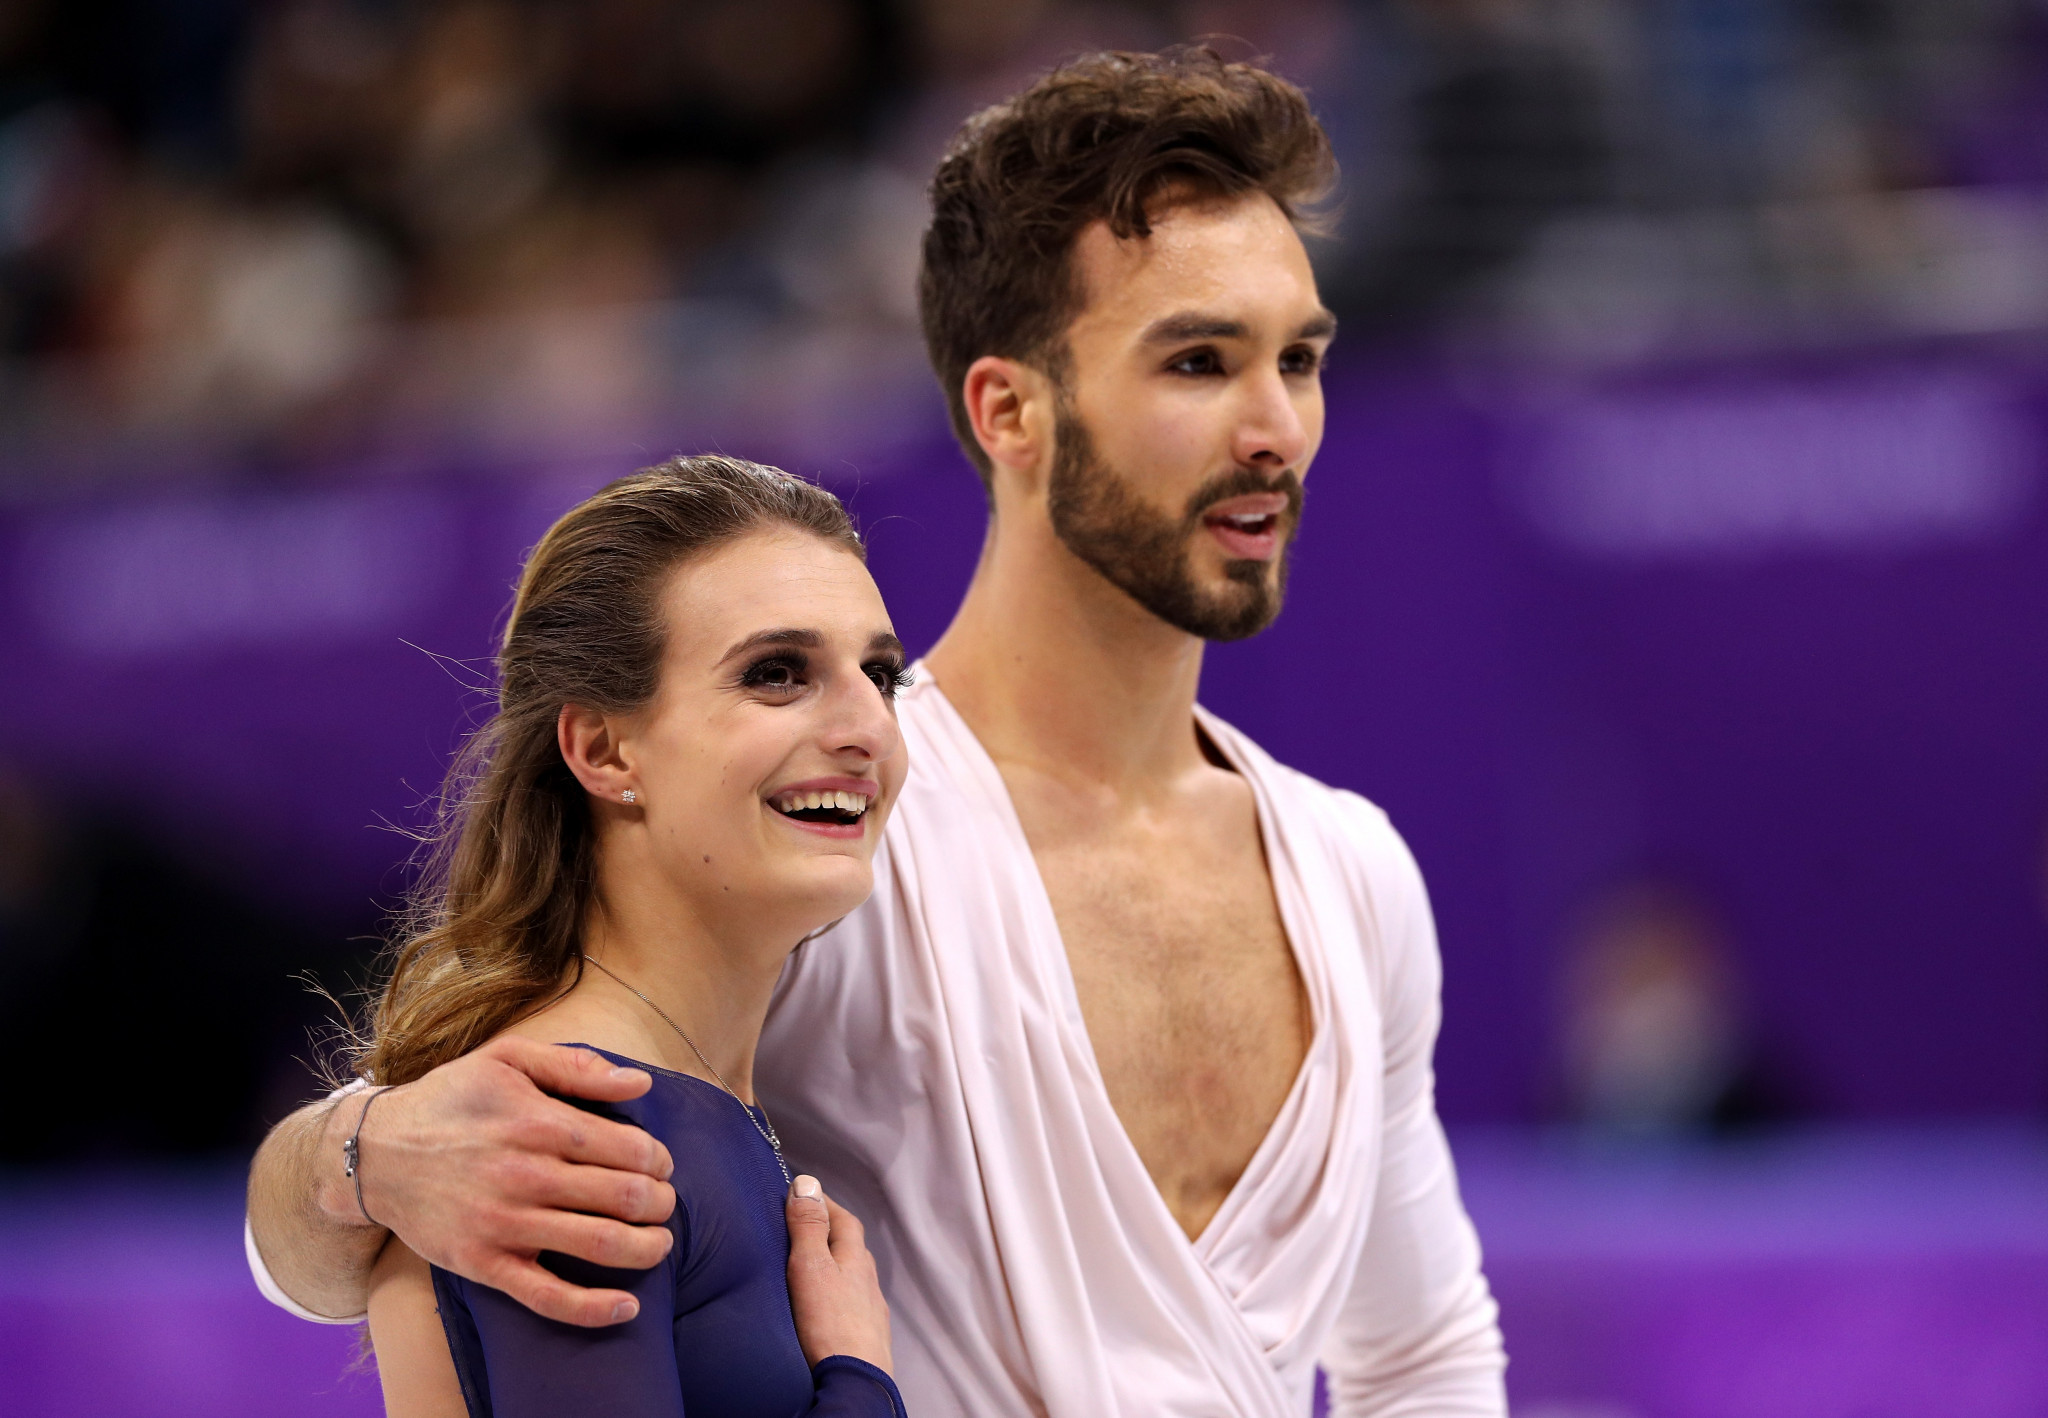 Winter Olympic figure skating silver medallist Guillaume Cizeron has come out publicly as gay ©Getty Images